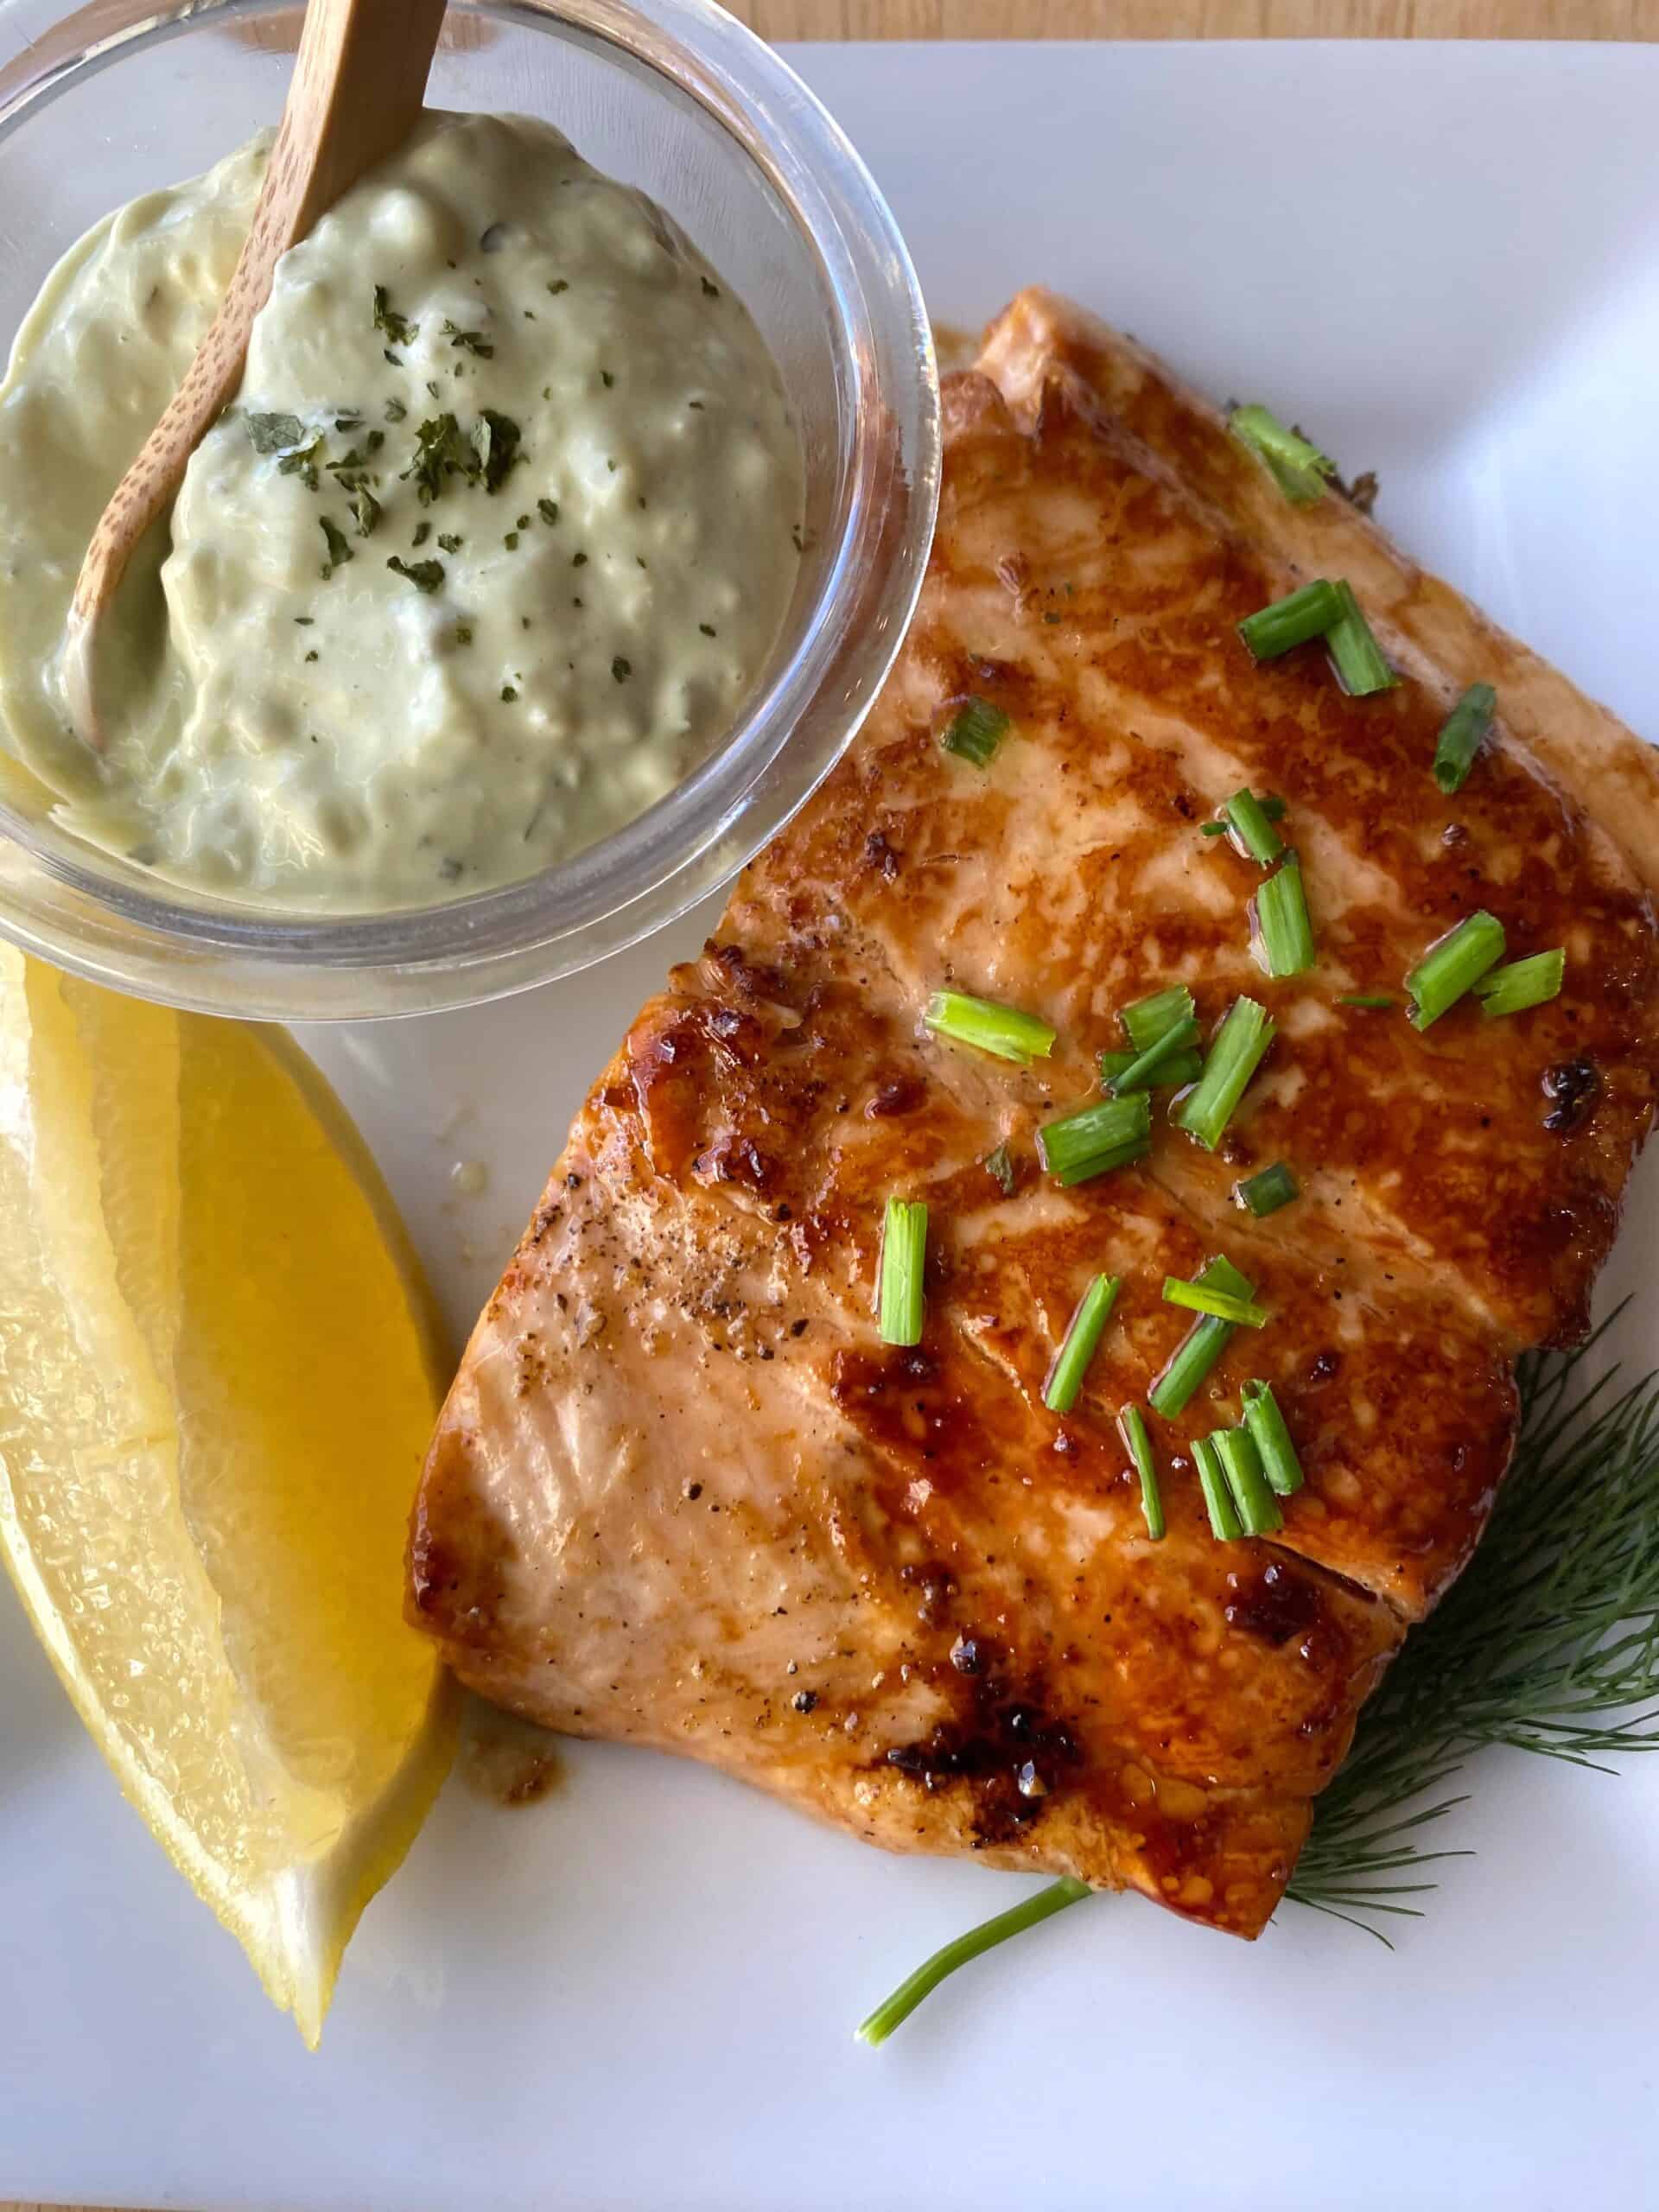 Salmon on a dish with a wedge of lemon and a small dish of tarter sauce